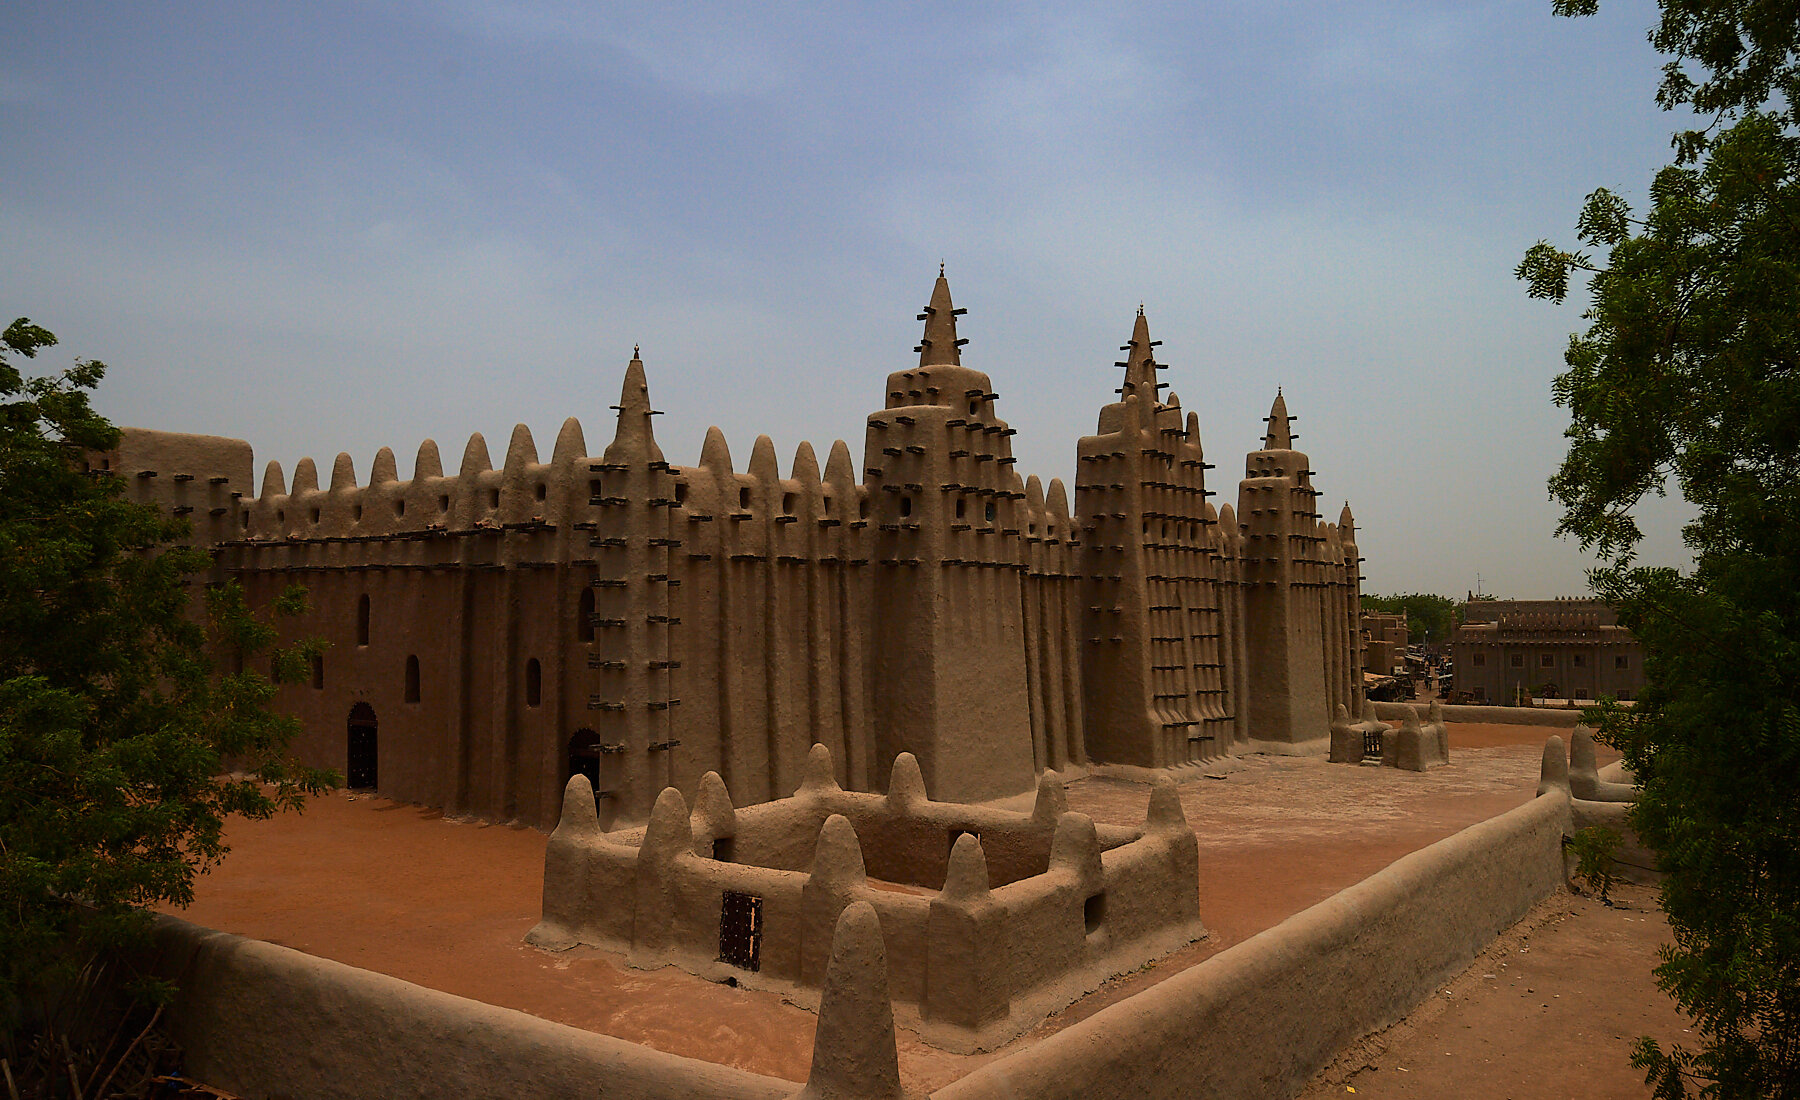 The famous Djenne mud mosque